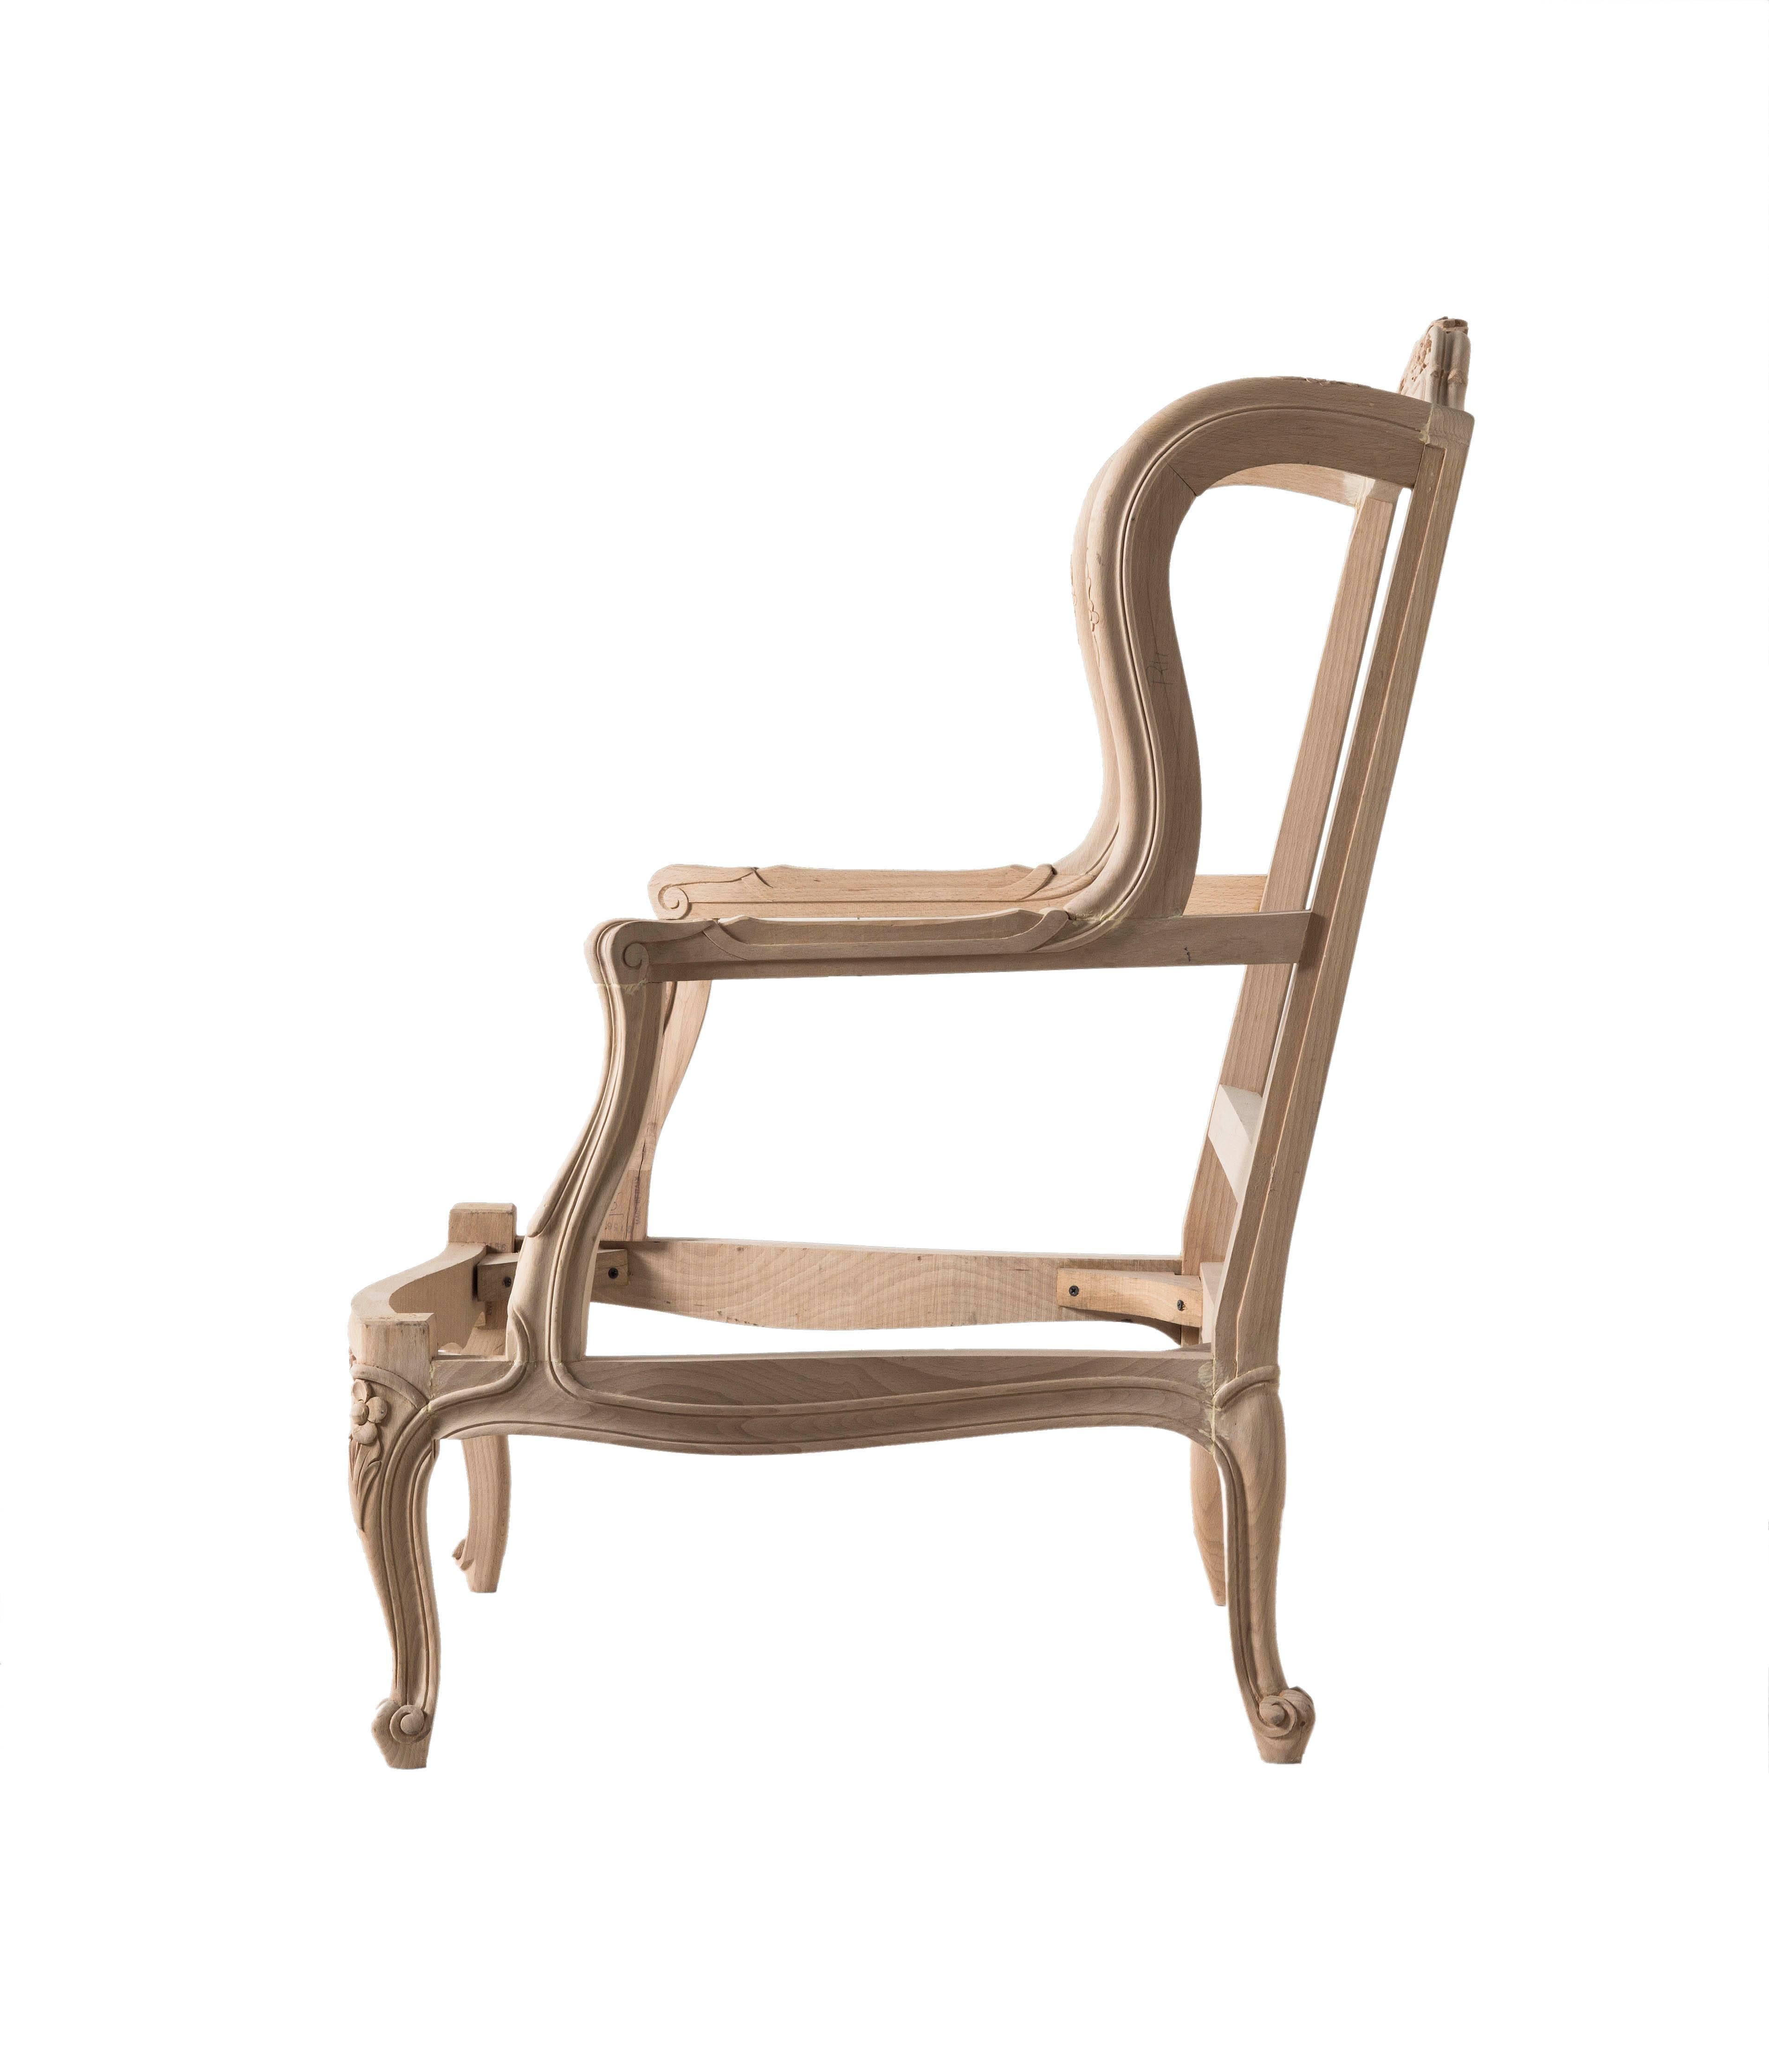 Louis XVI style Bergere chair in Italian beechwood
Hand-carved. Size: H 38.5